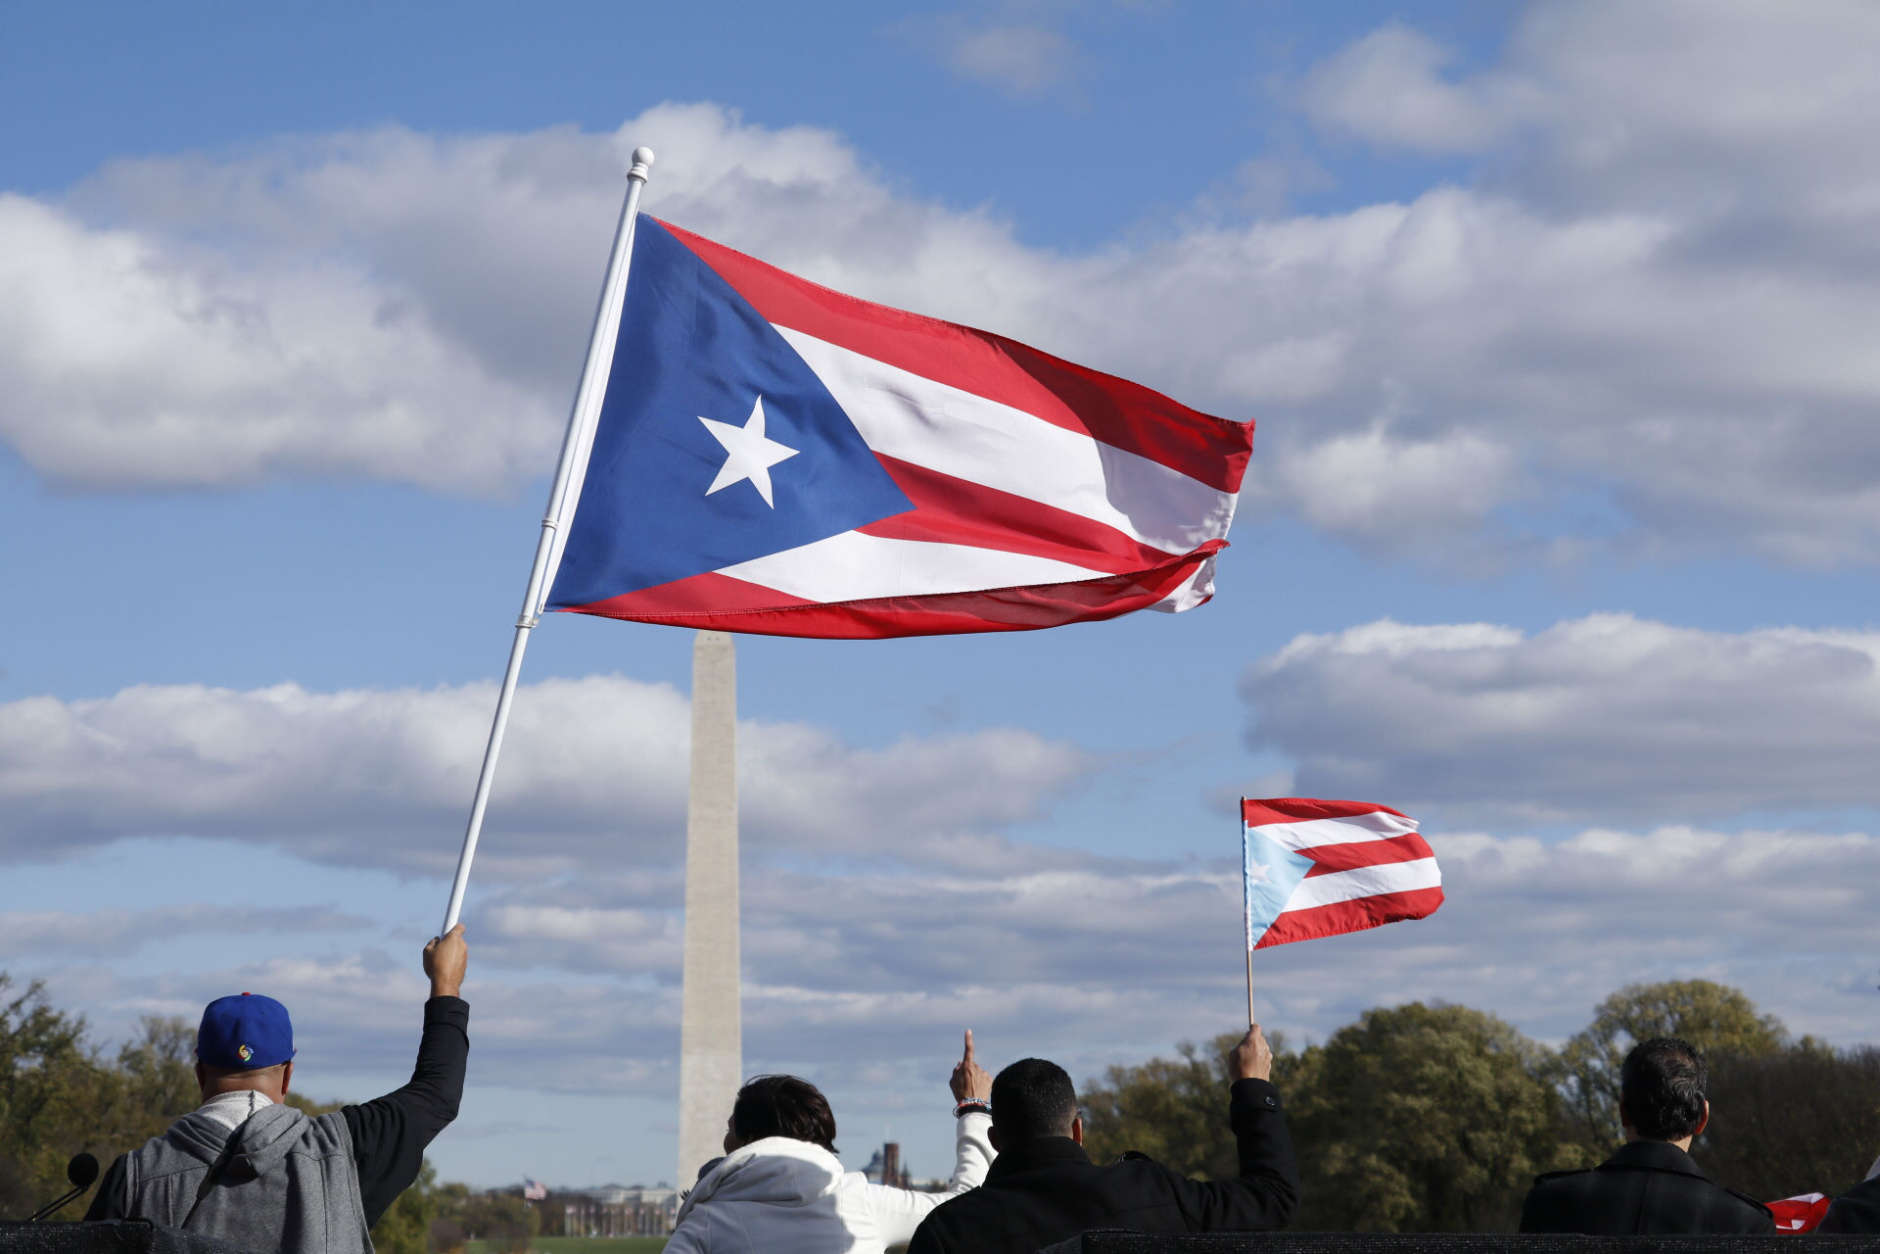 Marchers waved Puerto Rican flags during the March for Puerto Rico in Washington, D.C. on Sunday, Nov. 19. (WTOP/Kate Ryan)